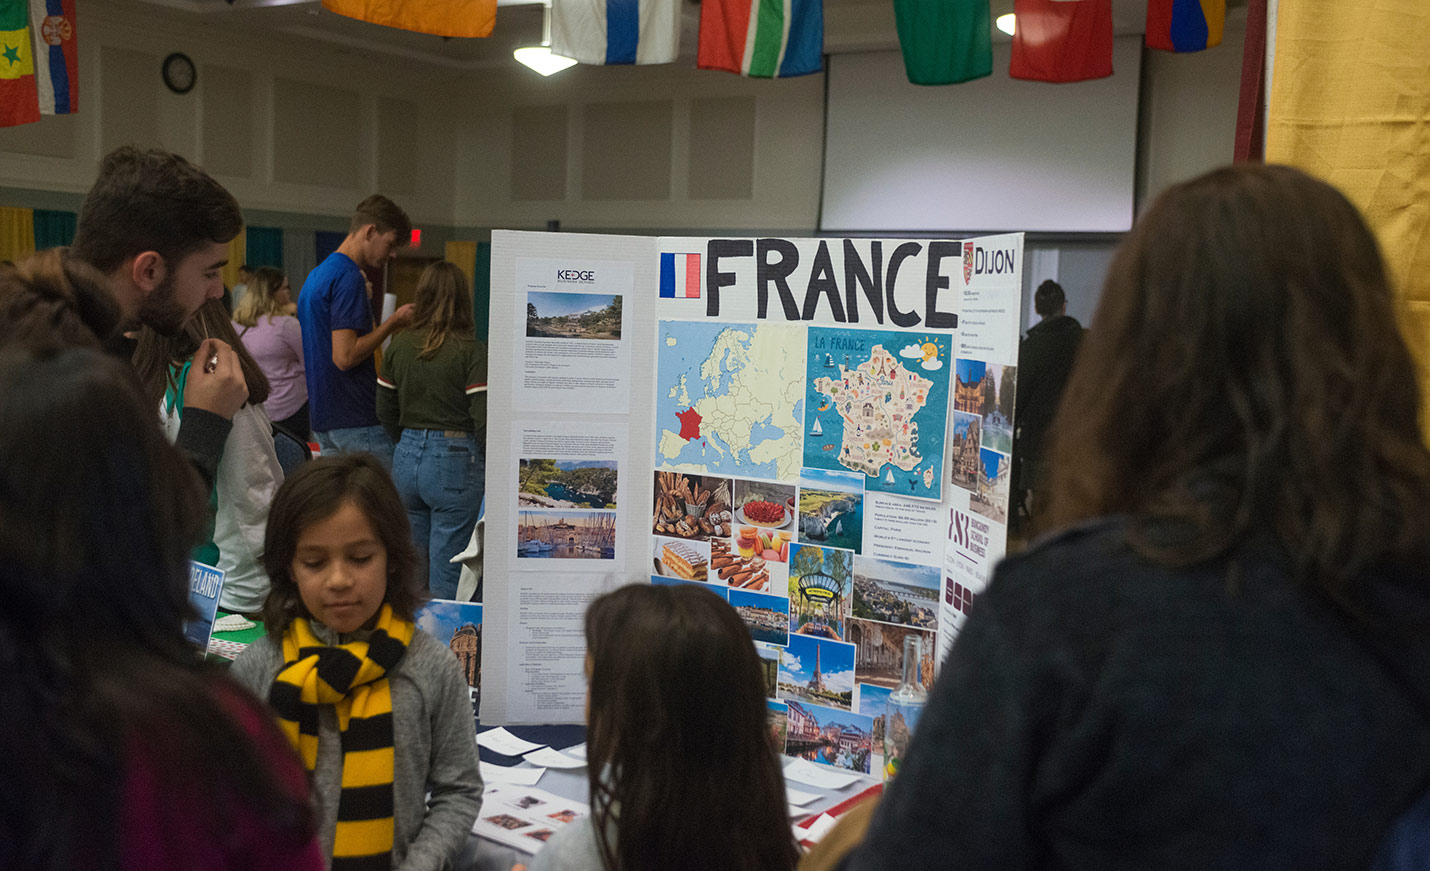 A poster about France stands on a table while people look at it